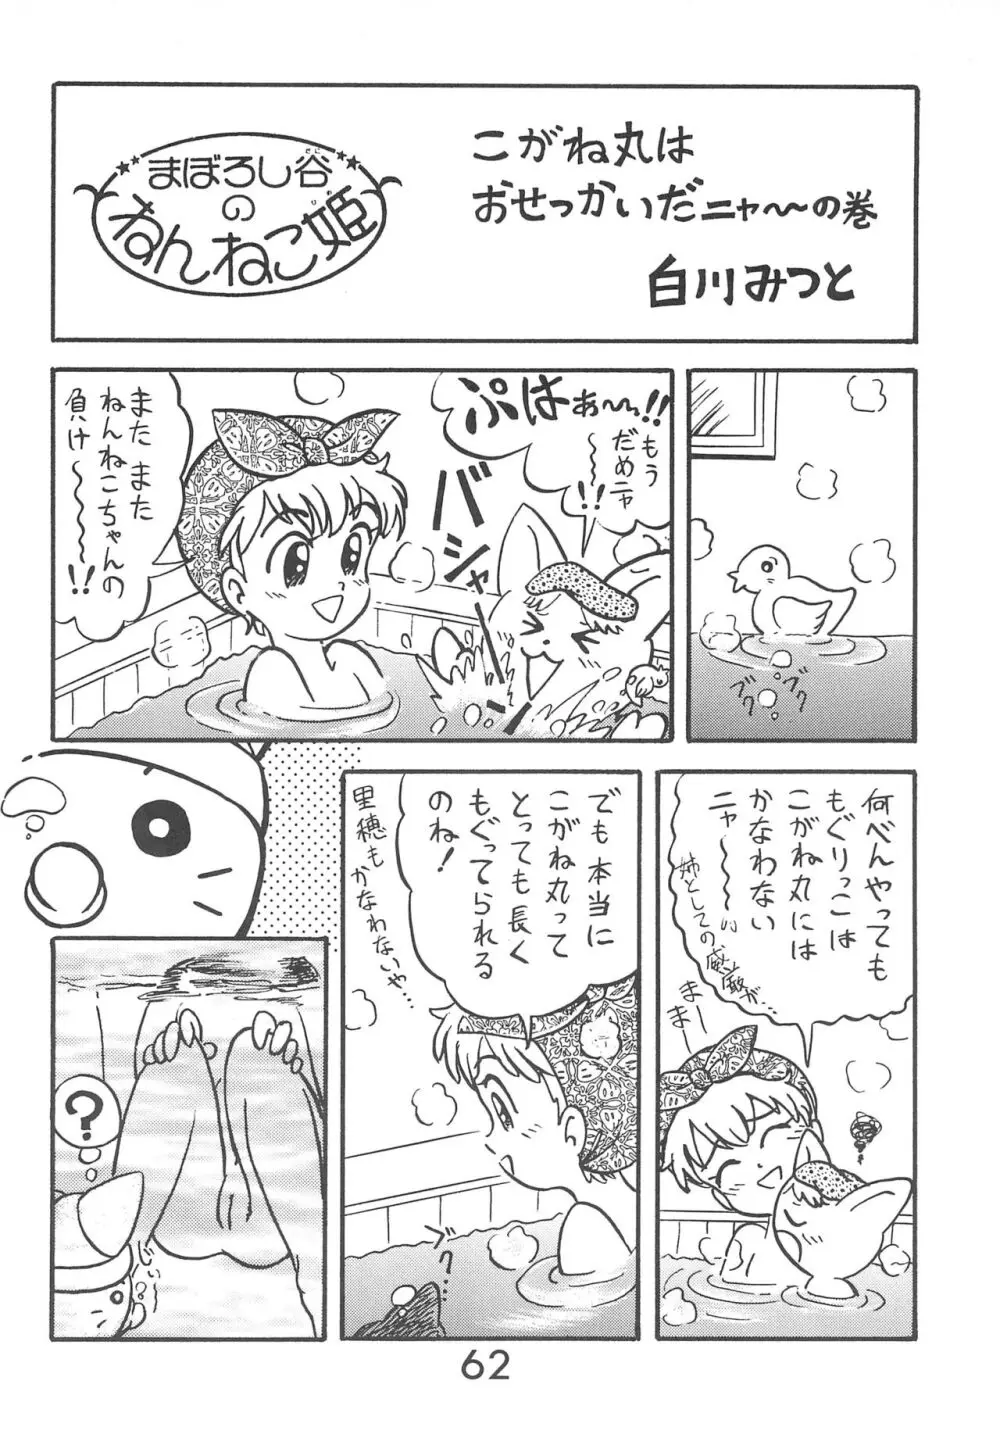 Fun House 9th Chame! - page62